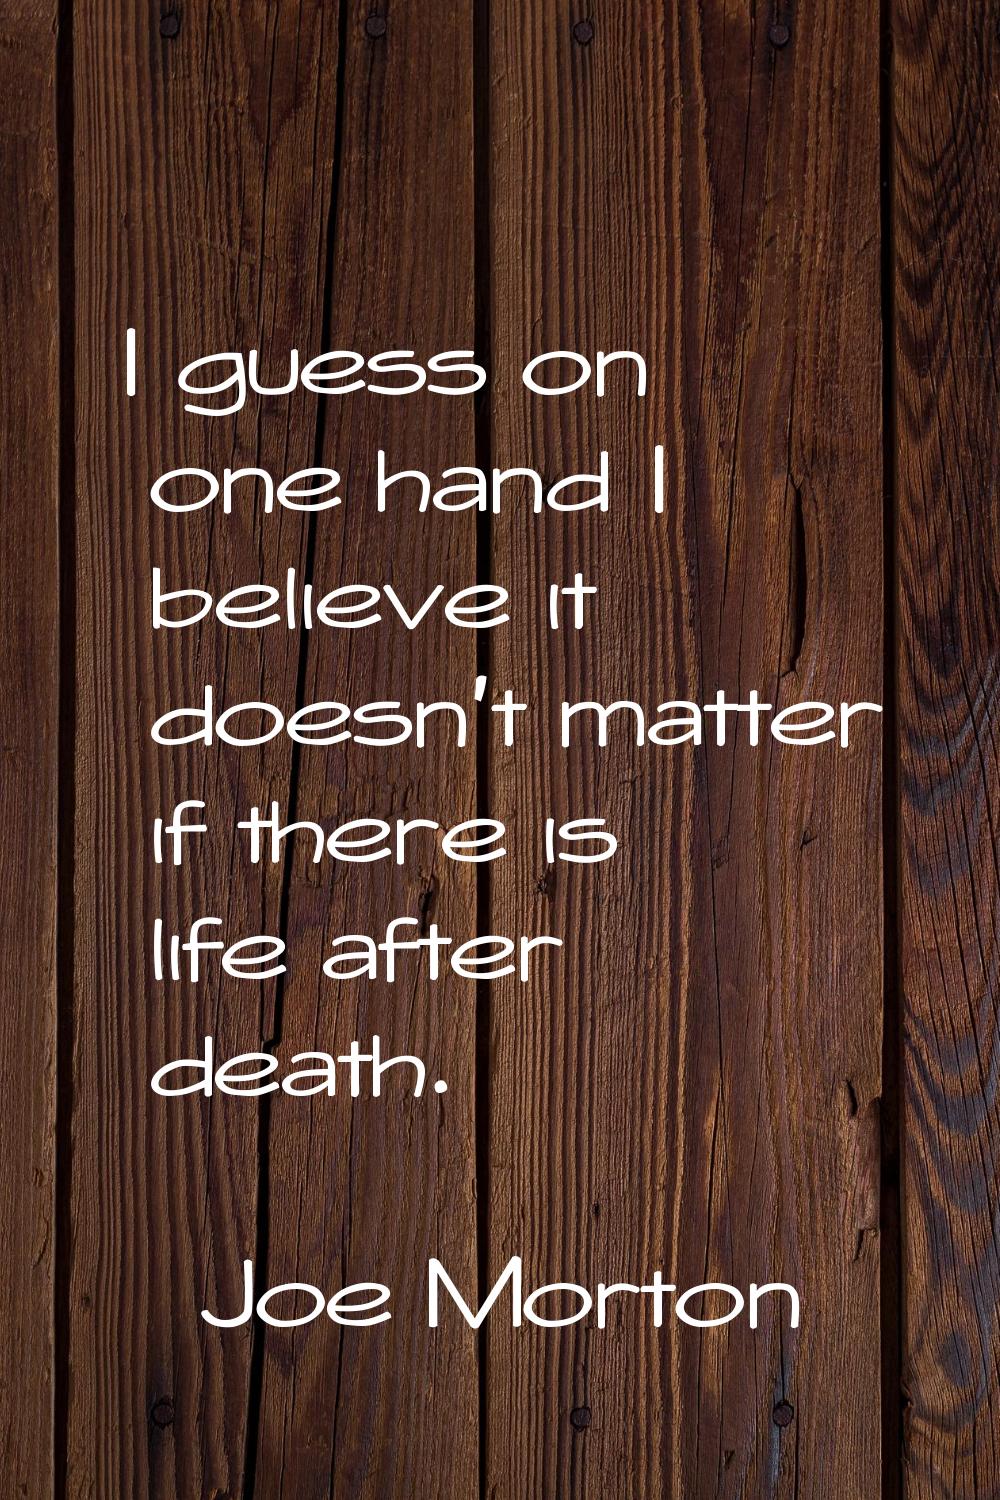 I guess on one hand I believe it doesn't matter if there is life after death.